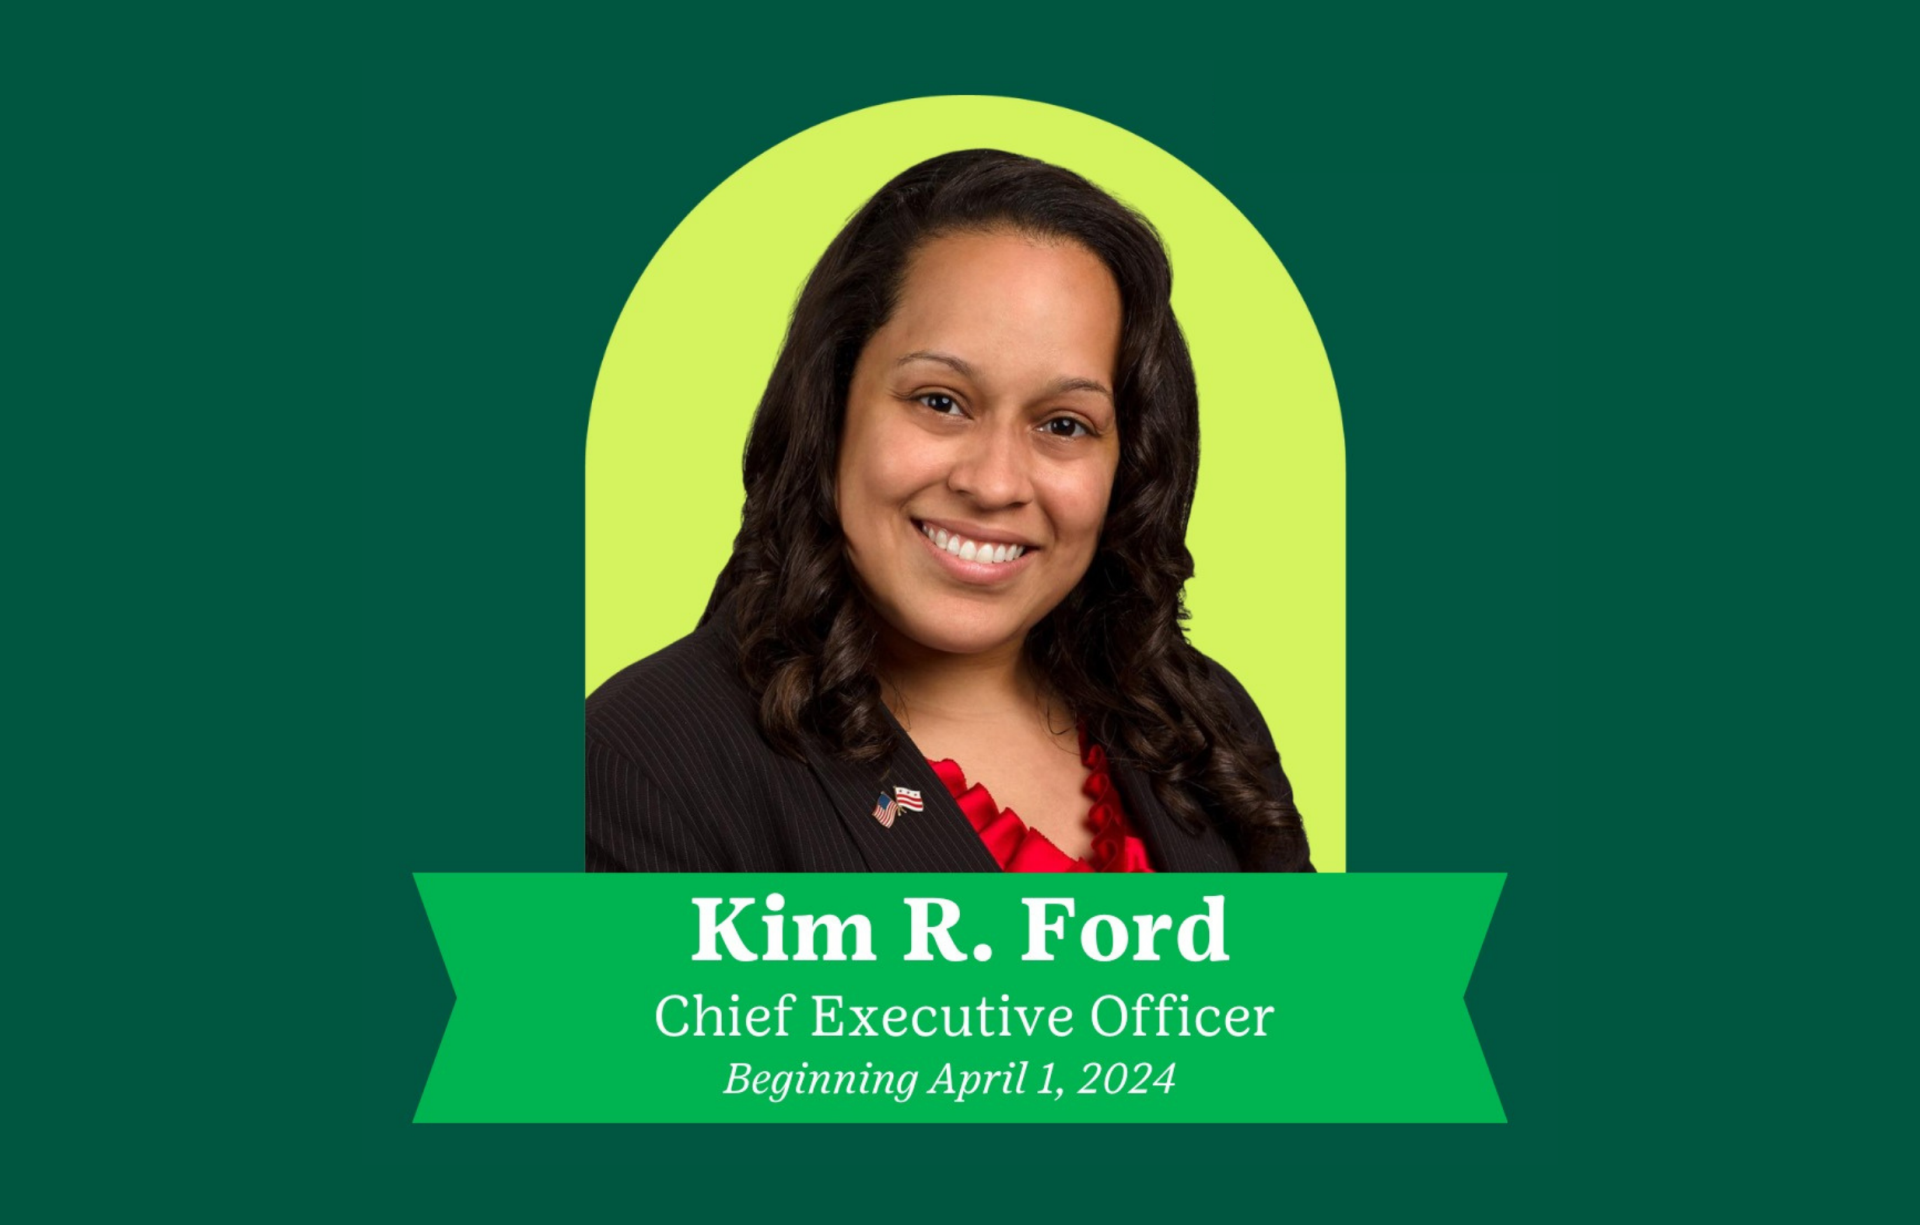 The new CEO Kim R. Ford